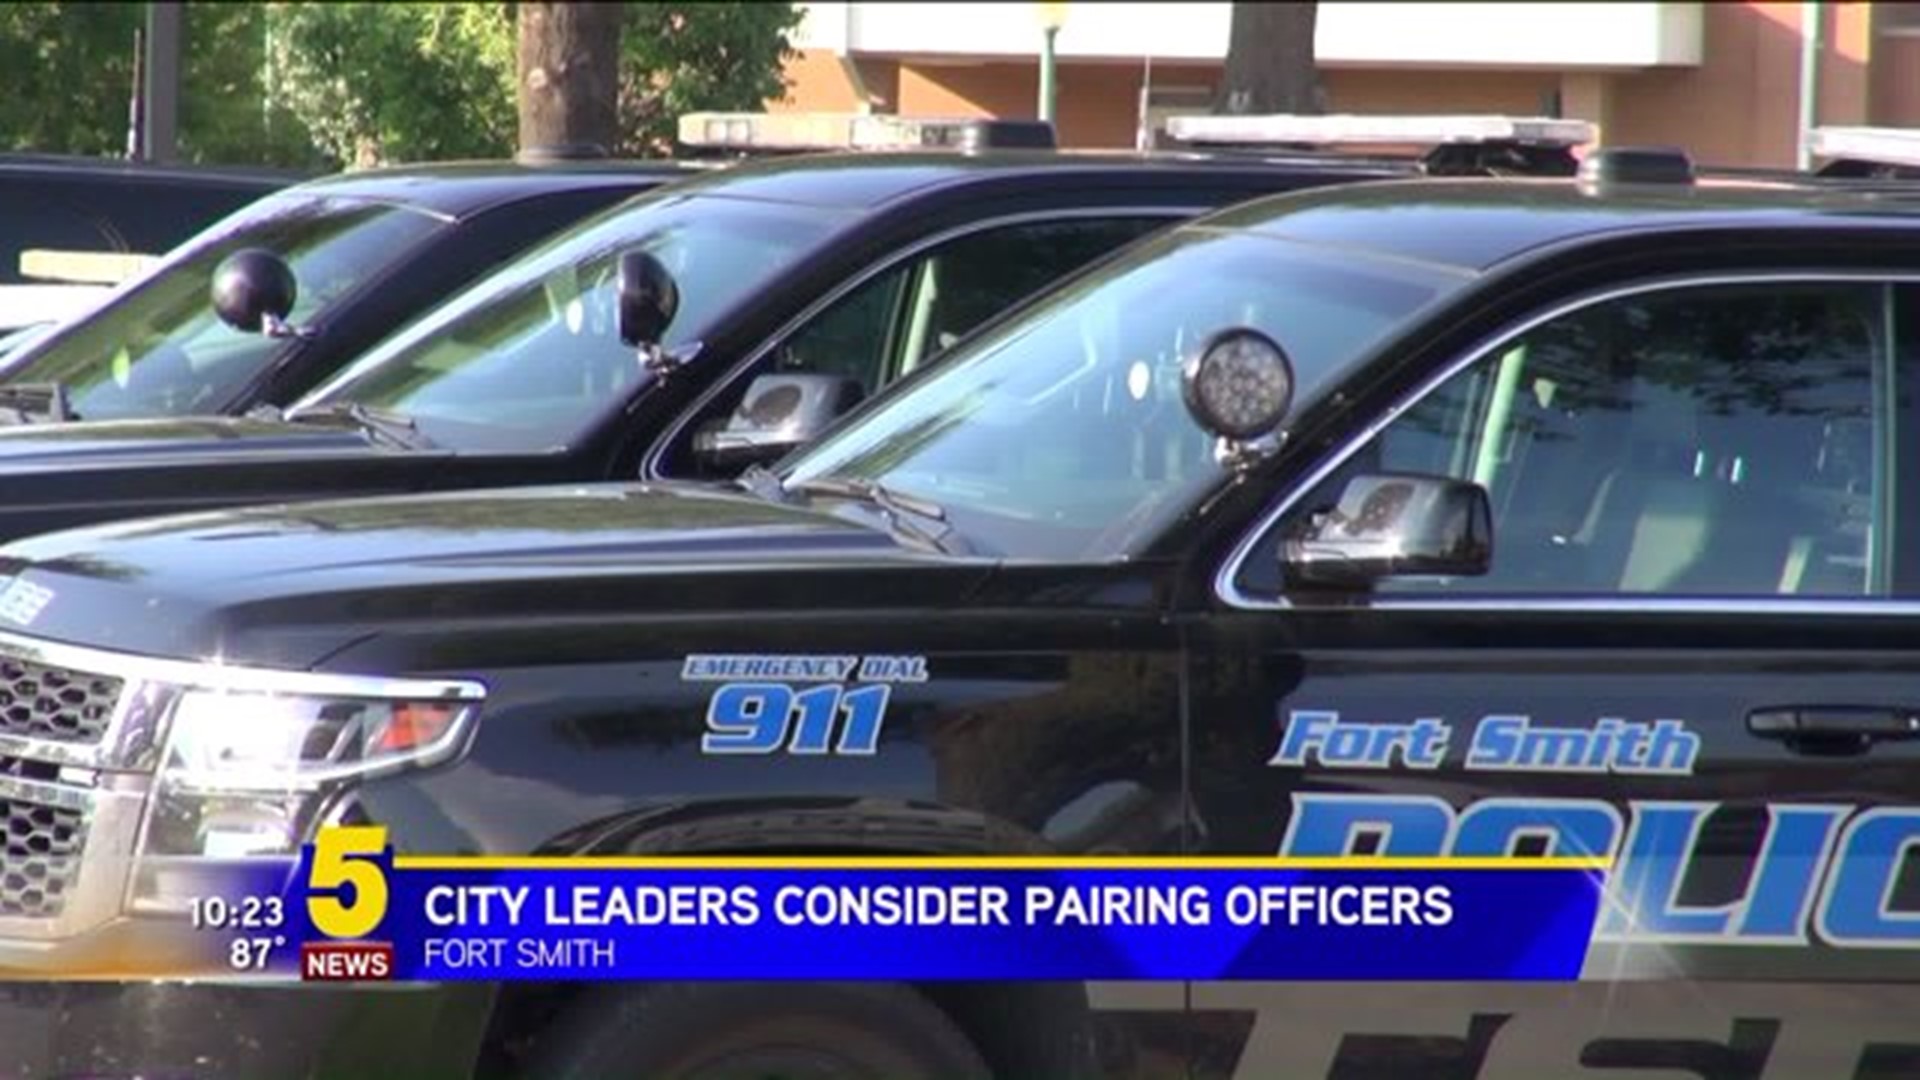 City Leaders Consider Pairing Officers